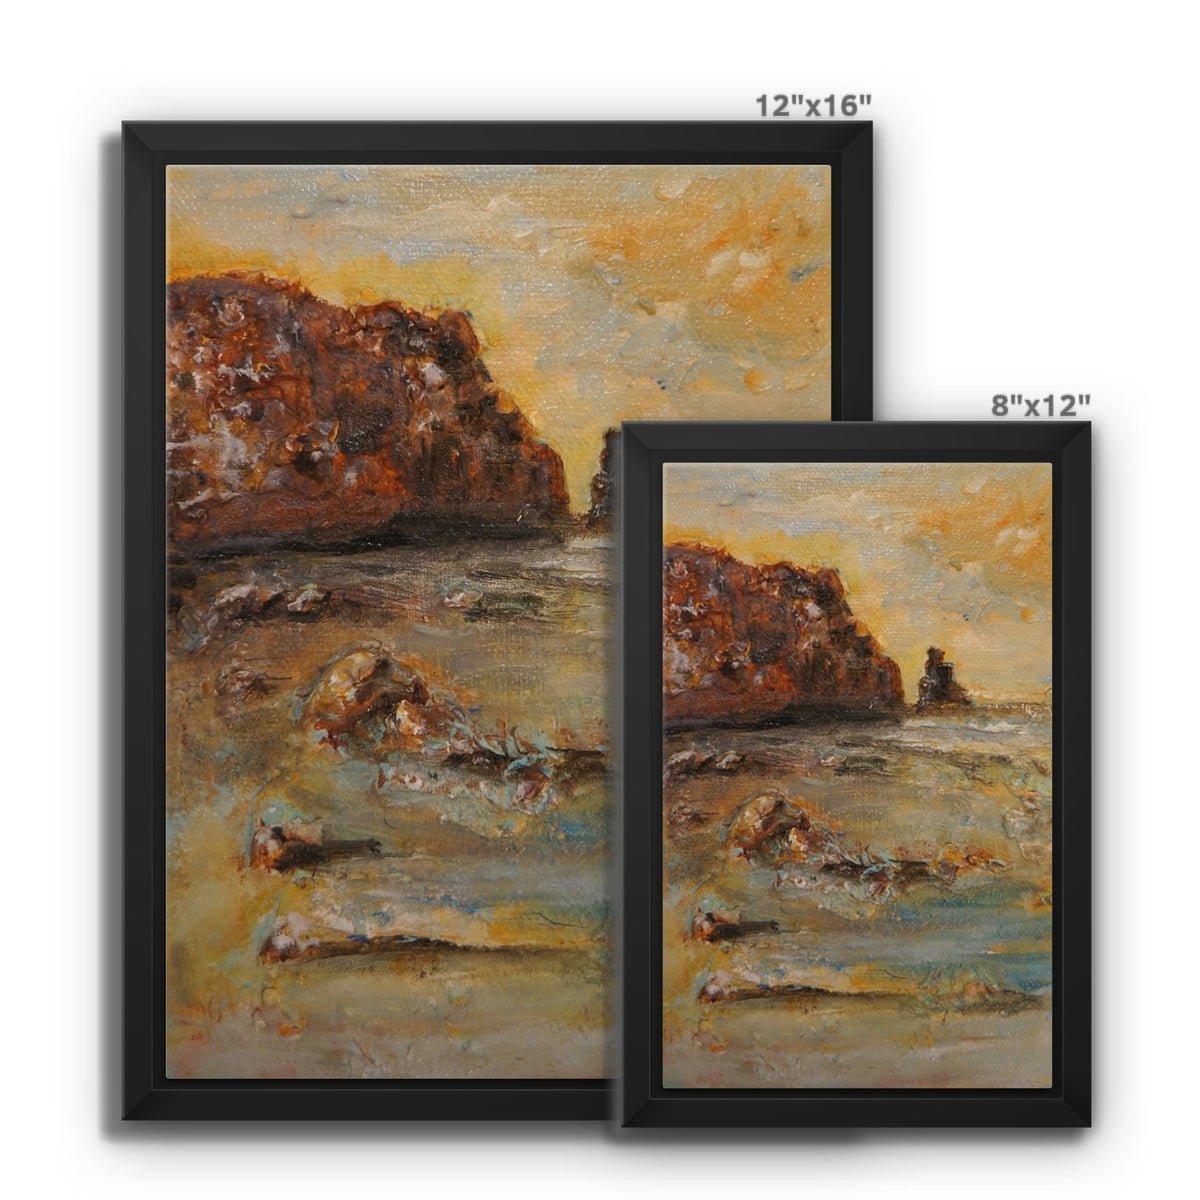 Talisker Bay Skye Painting | Framed Canvas From Scotland-Floating Framed Canvas Prints-Skye Art Gallery-Paintings, Prints, Homeware, Art Gifts From Scotland By Scottish Artist Kevin Hunter